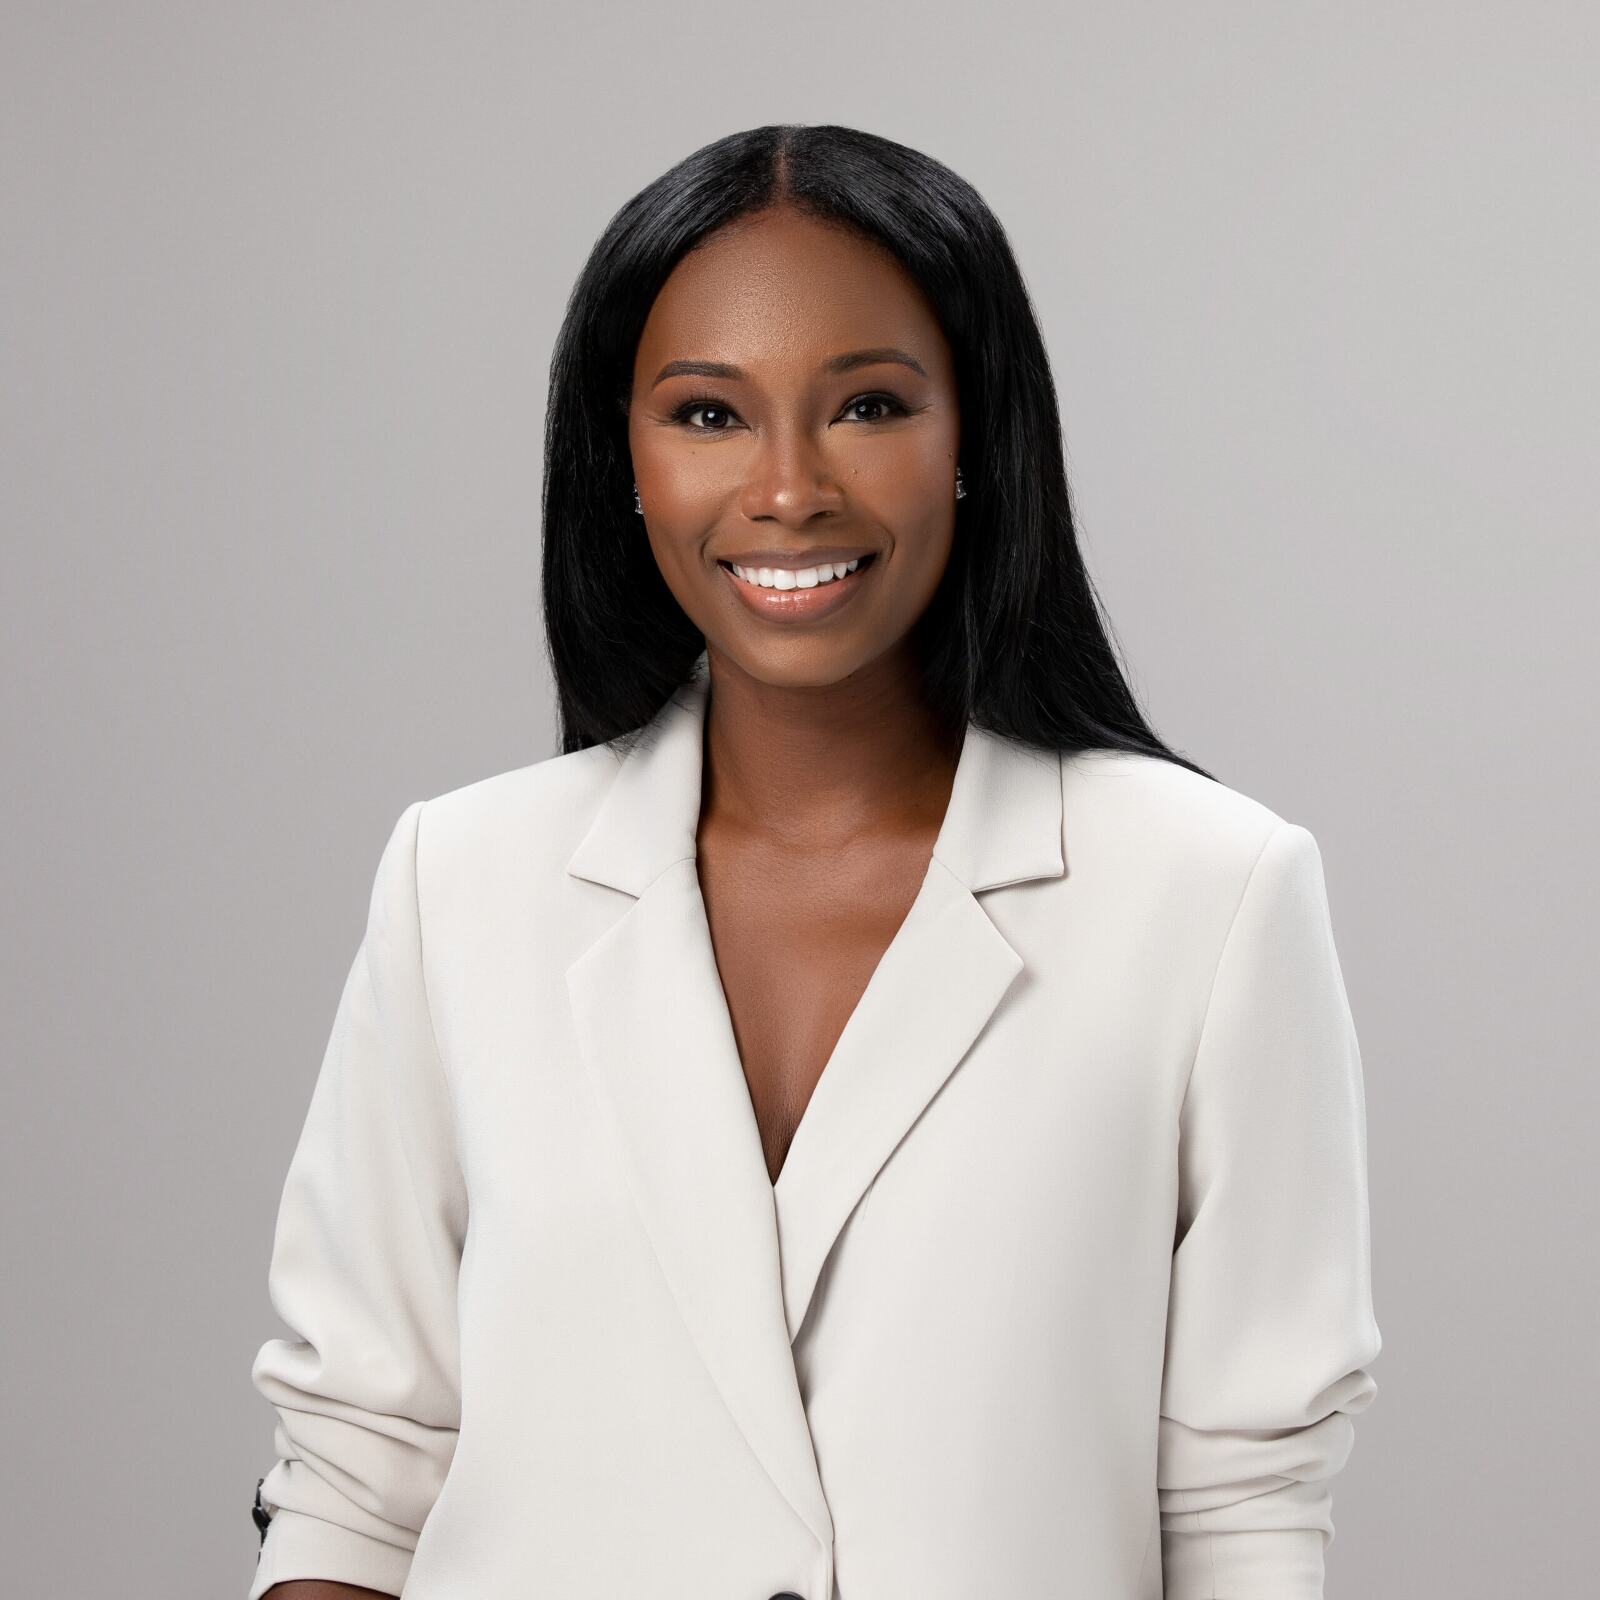 Engaging African American business woman wearing a white suit